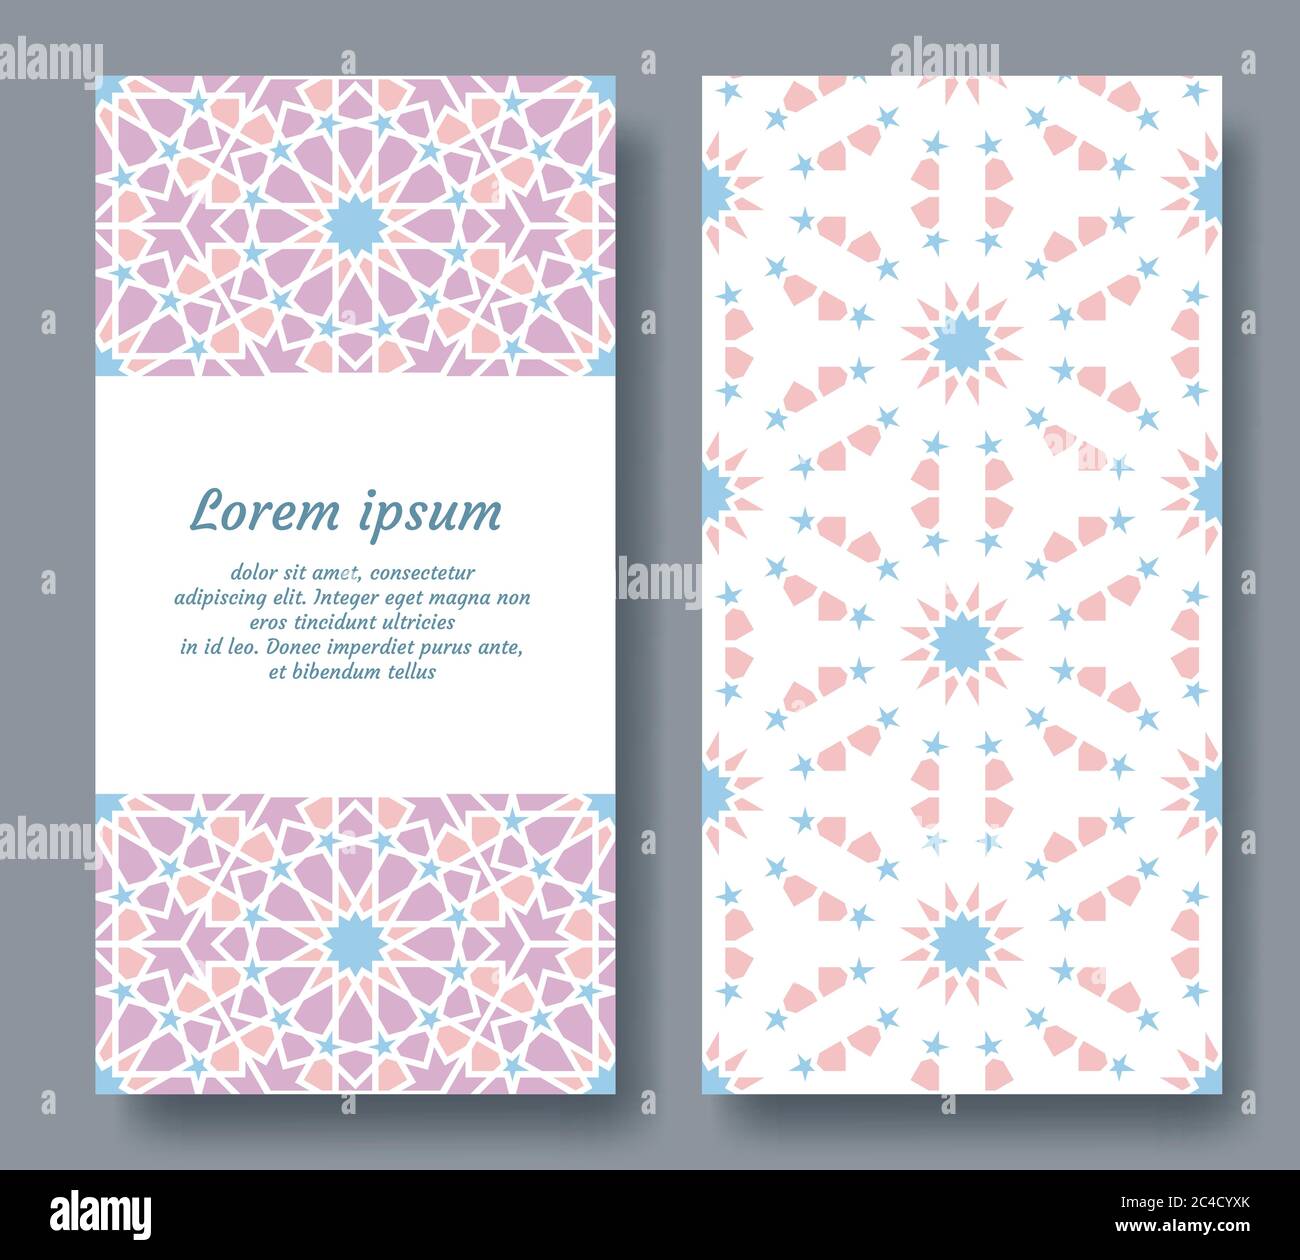 Arabesque double card design for invitation, celebration, save the date, wedding performed in arabesque geometric flowers. Vector card template Stock Vector